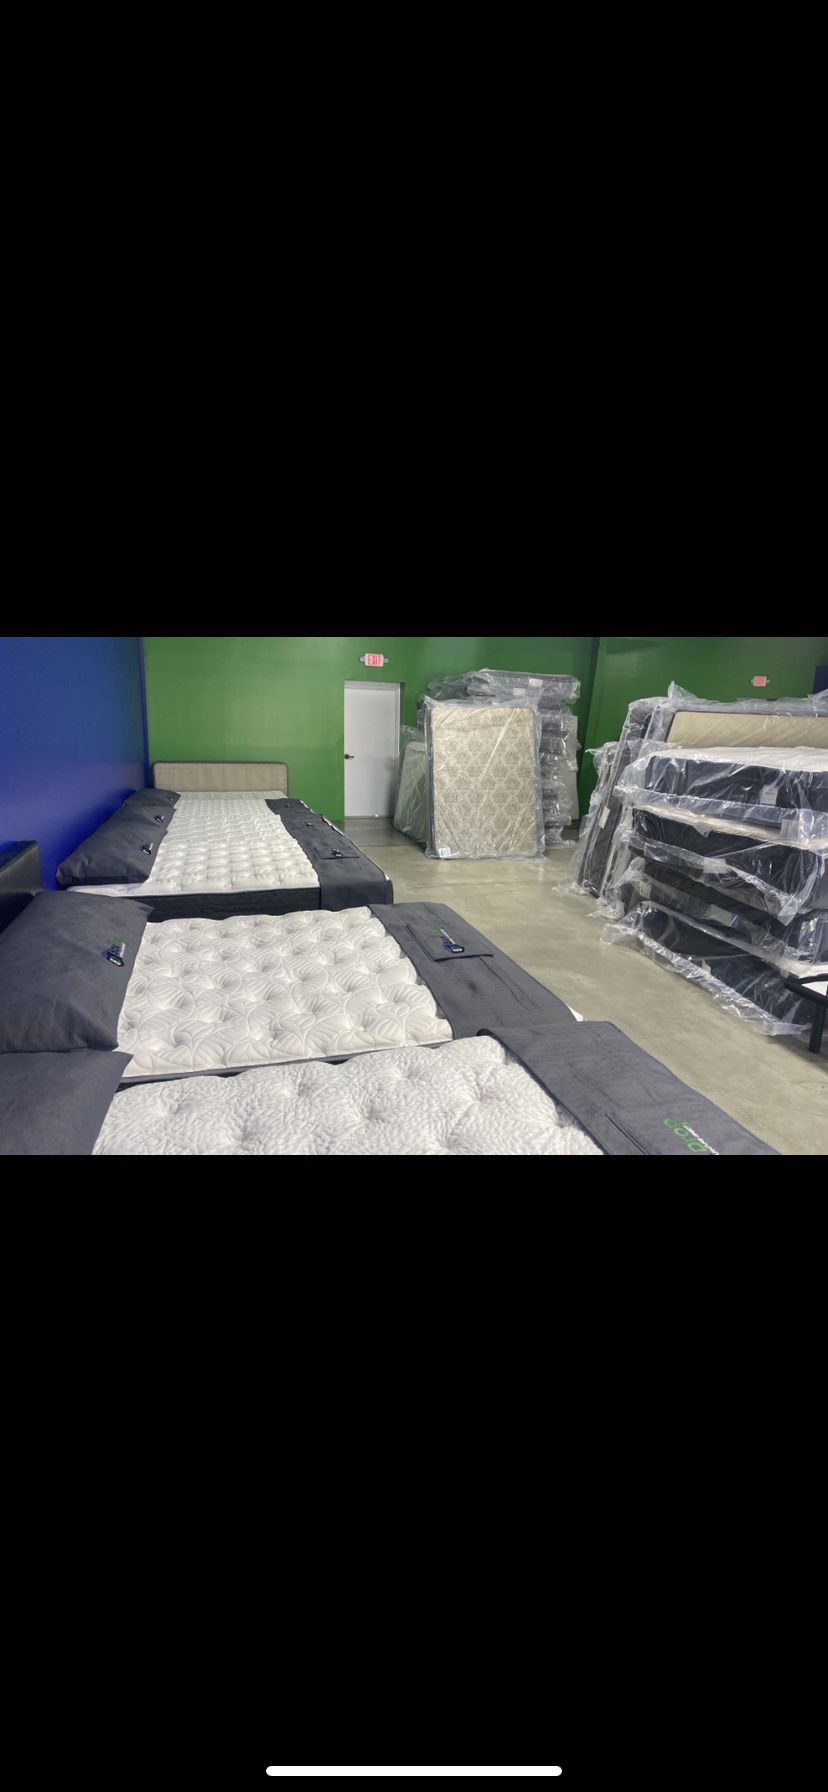 Queen Mattresses Moving Quickly!!!